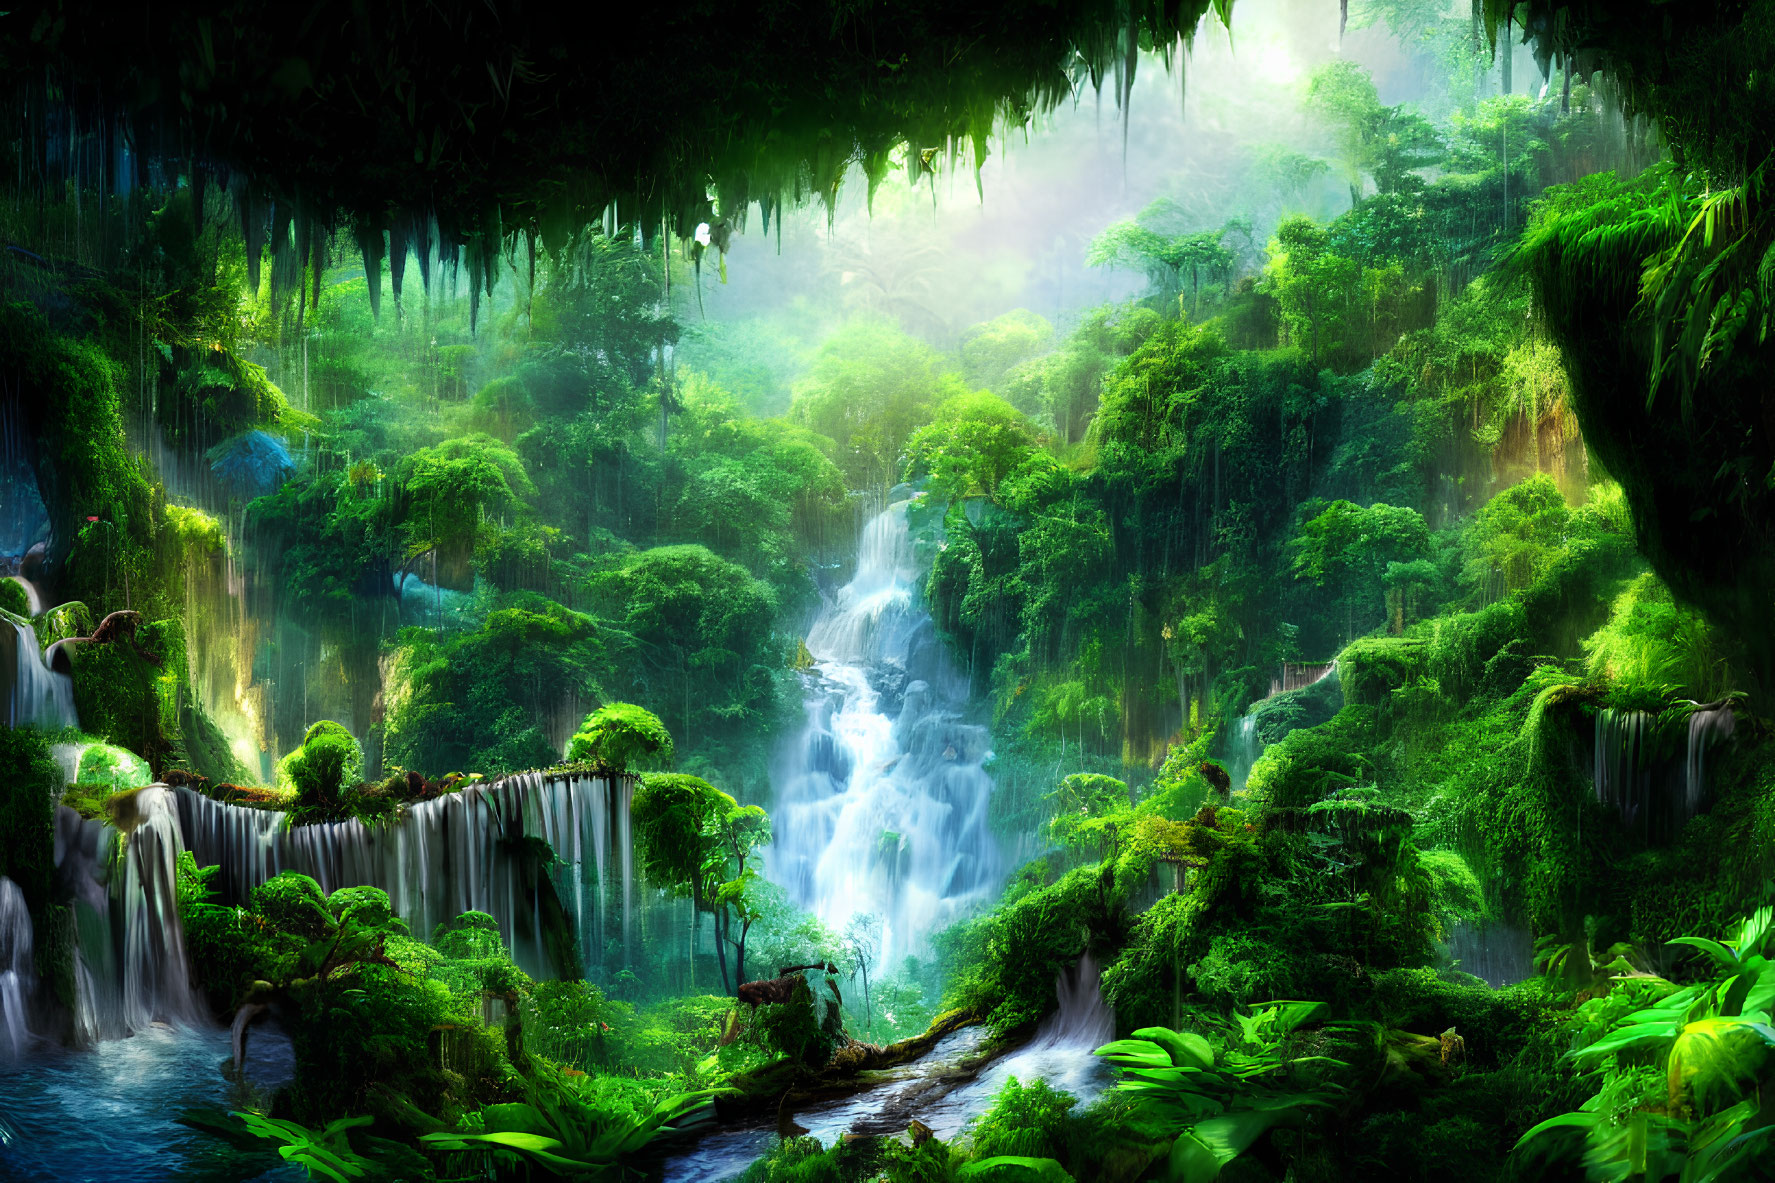 Lush green forest with waterfalls and river in misty atmosphere